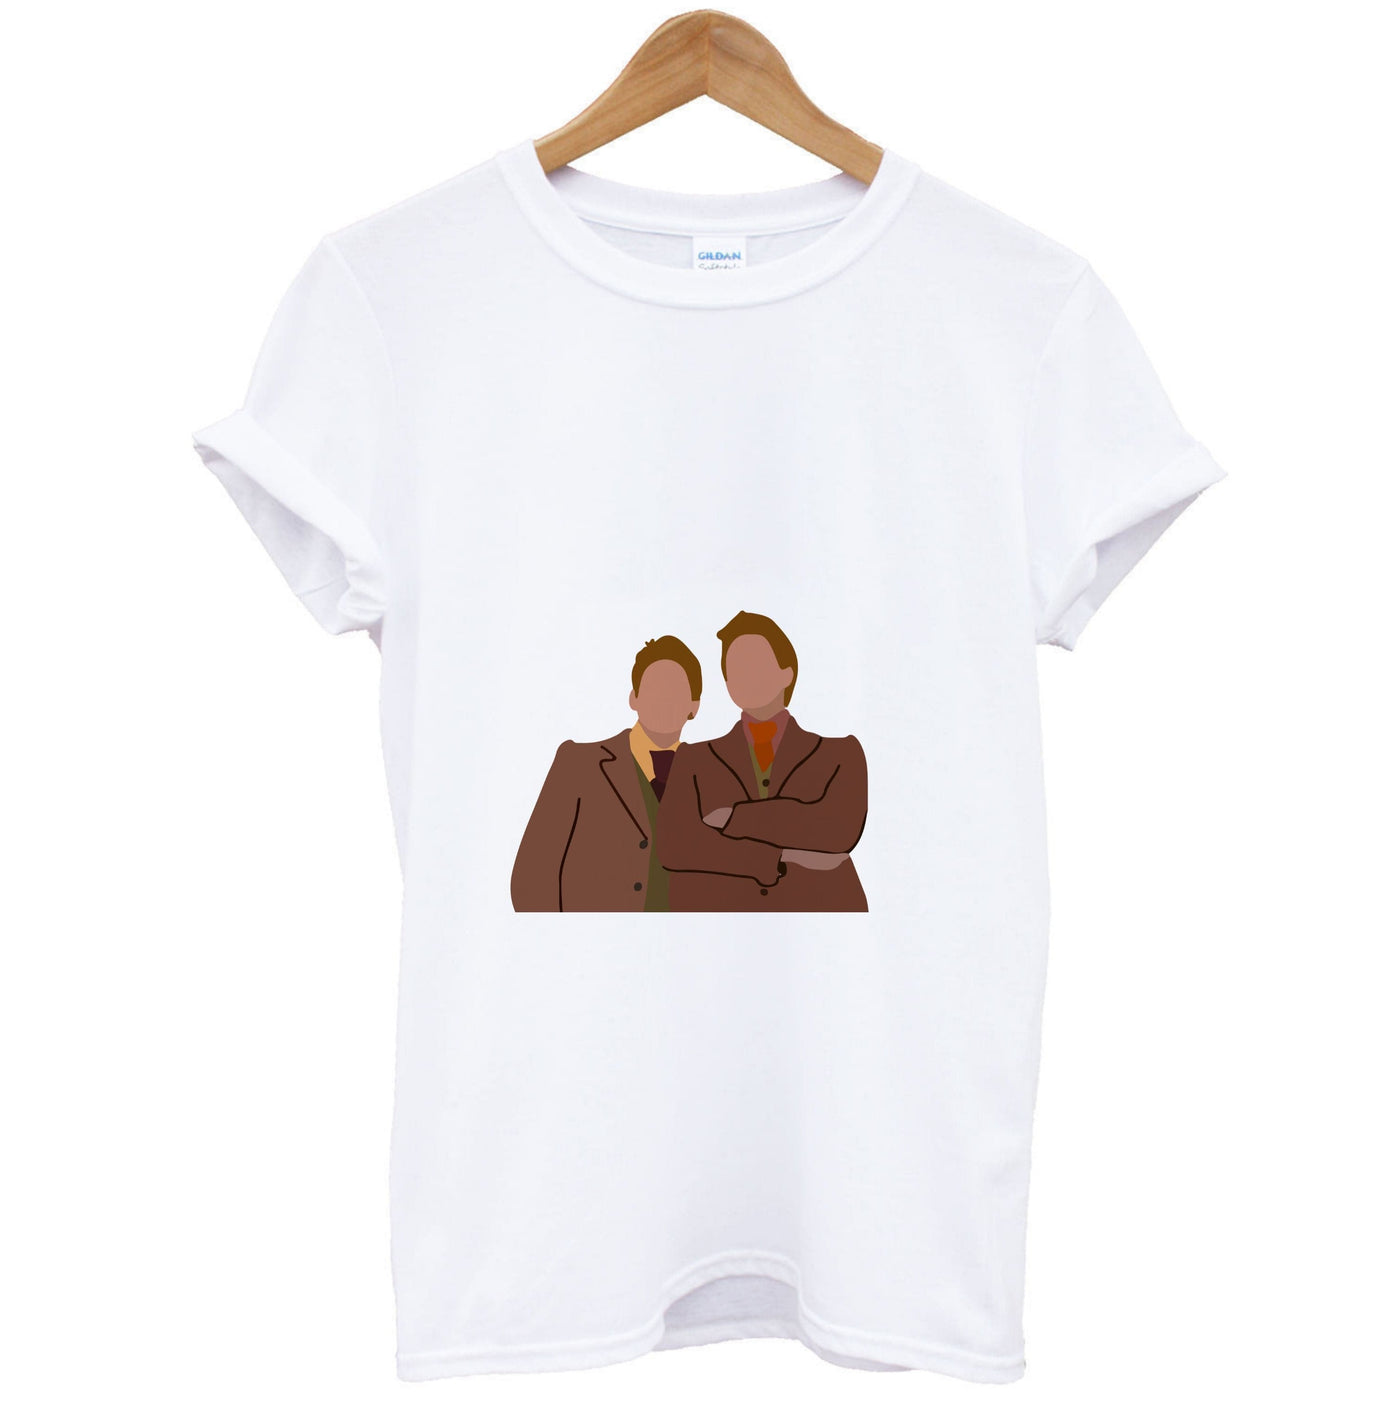 Fred And George - Harry Potter T-Shirt